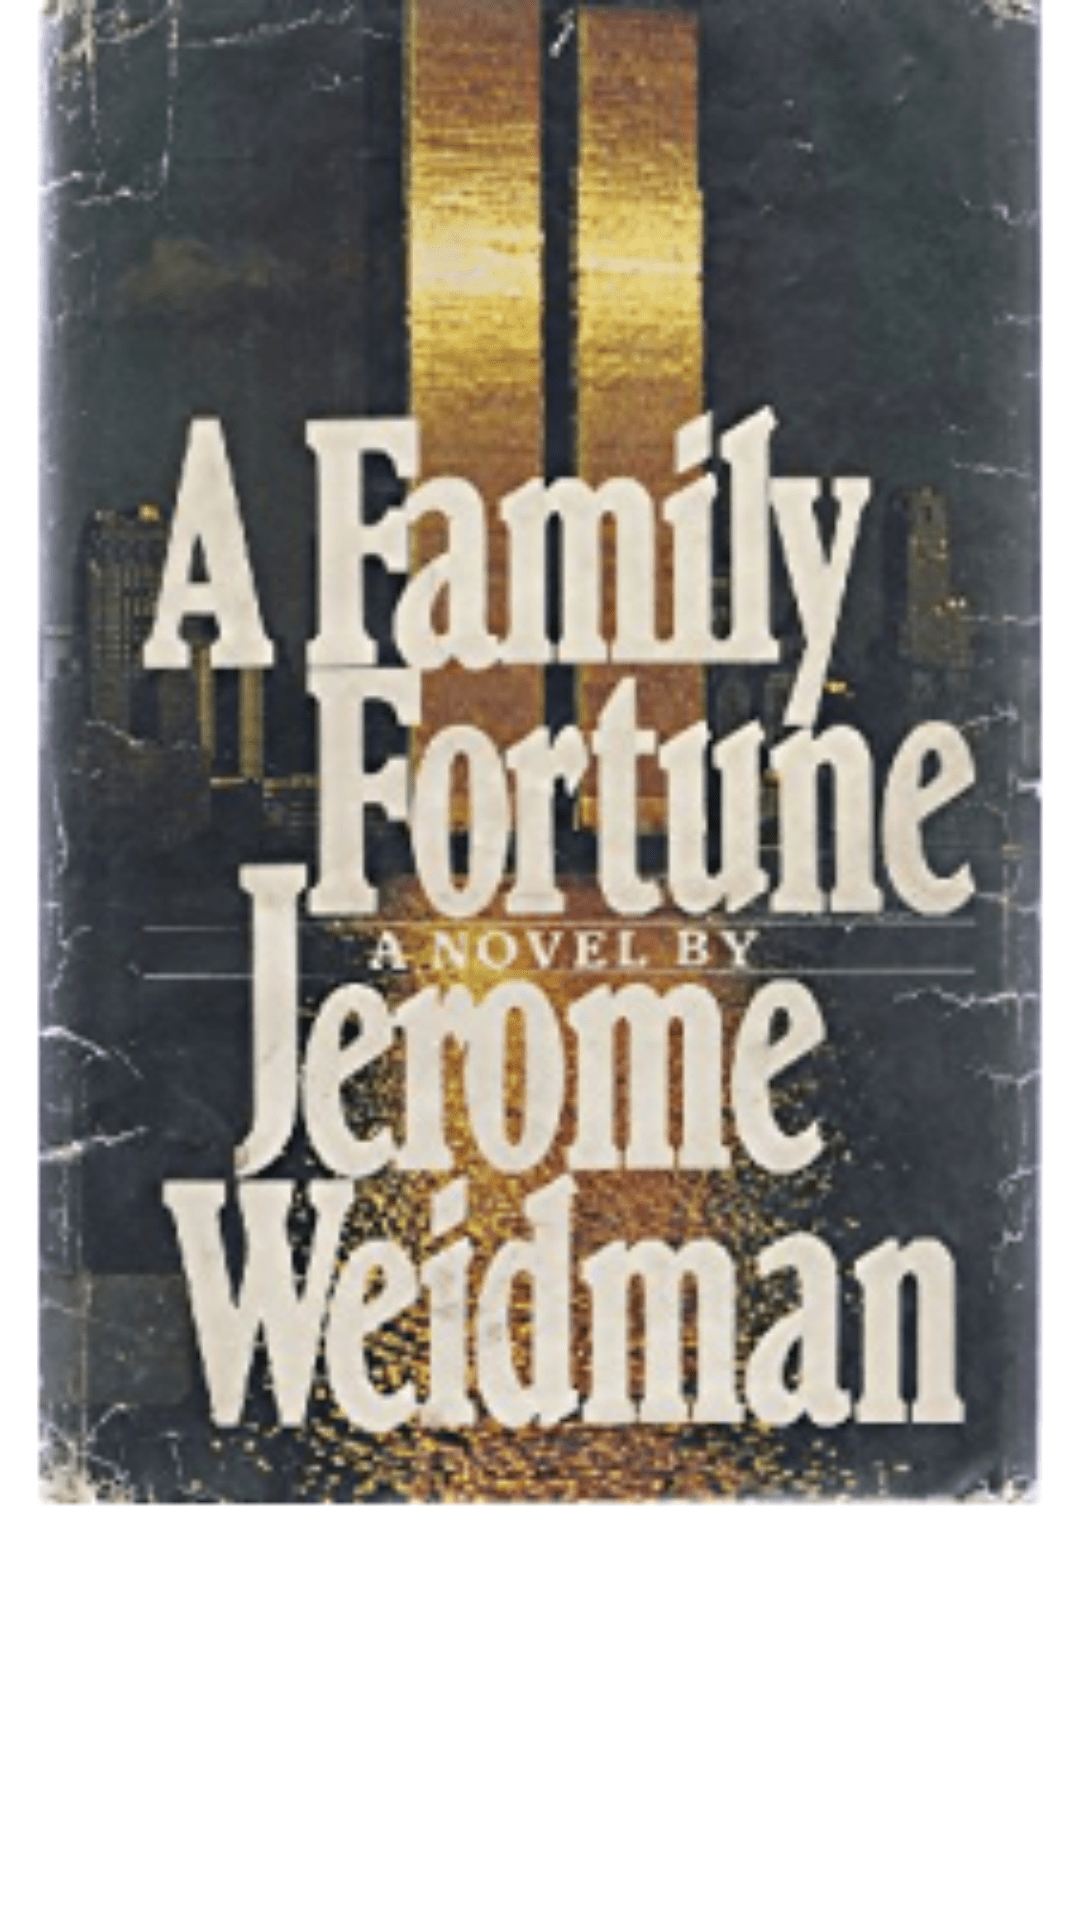 A Family Fortune